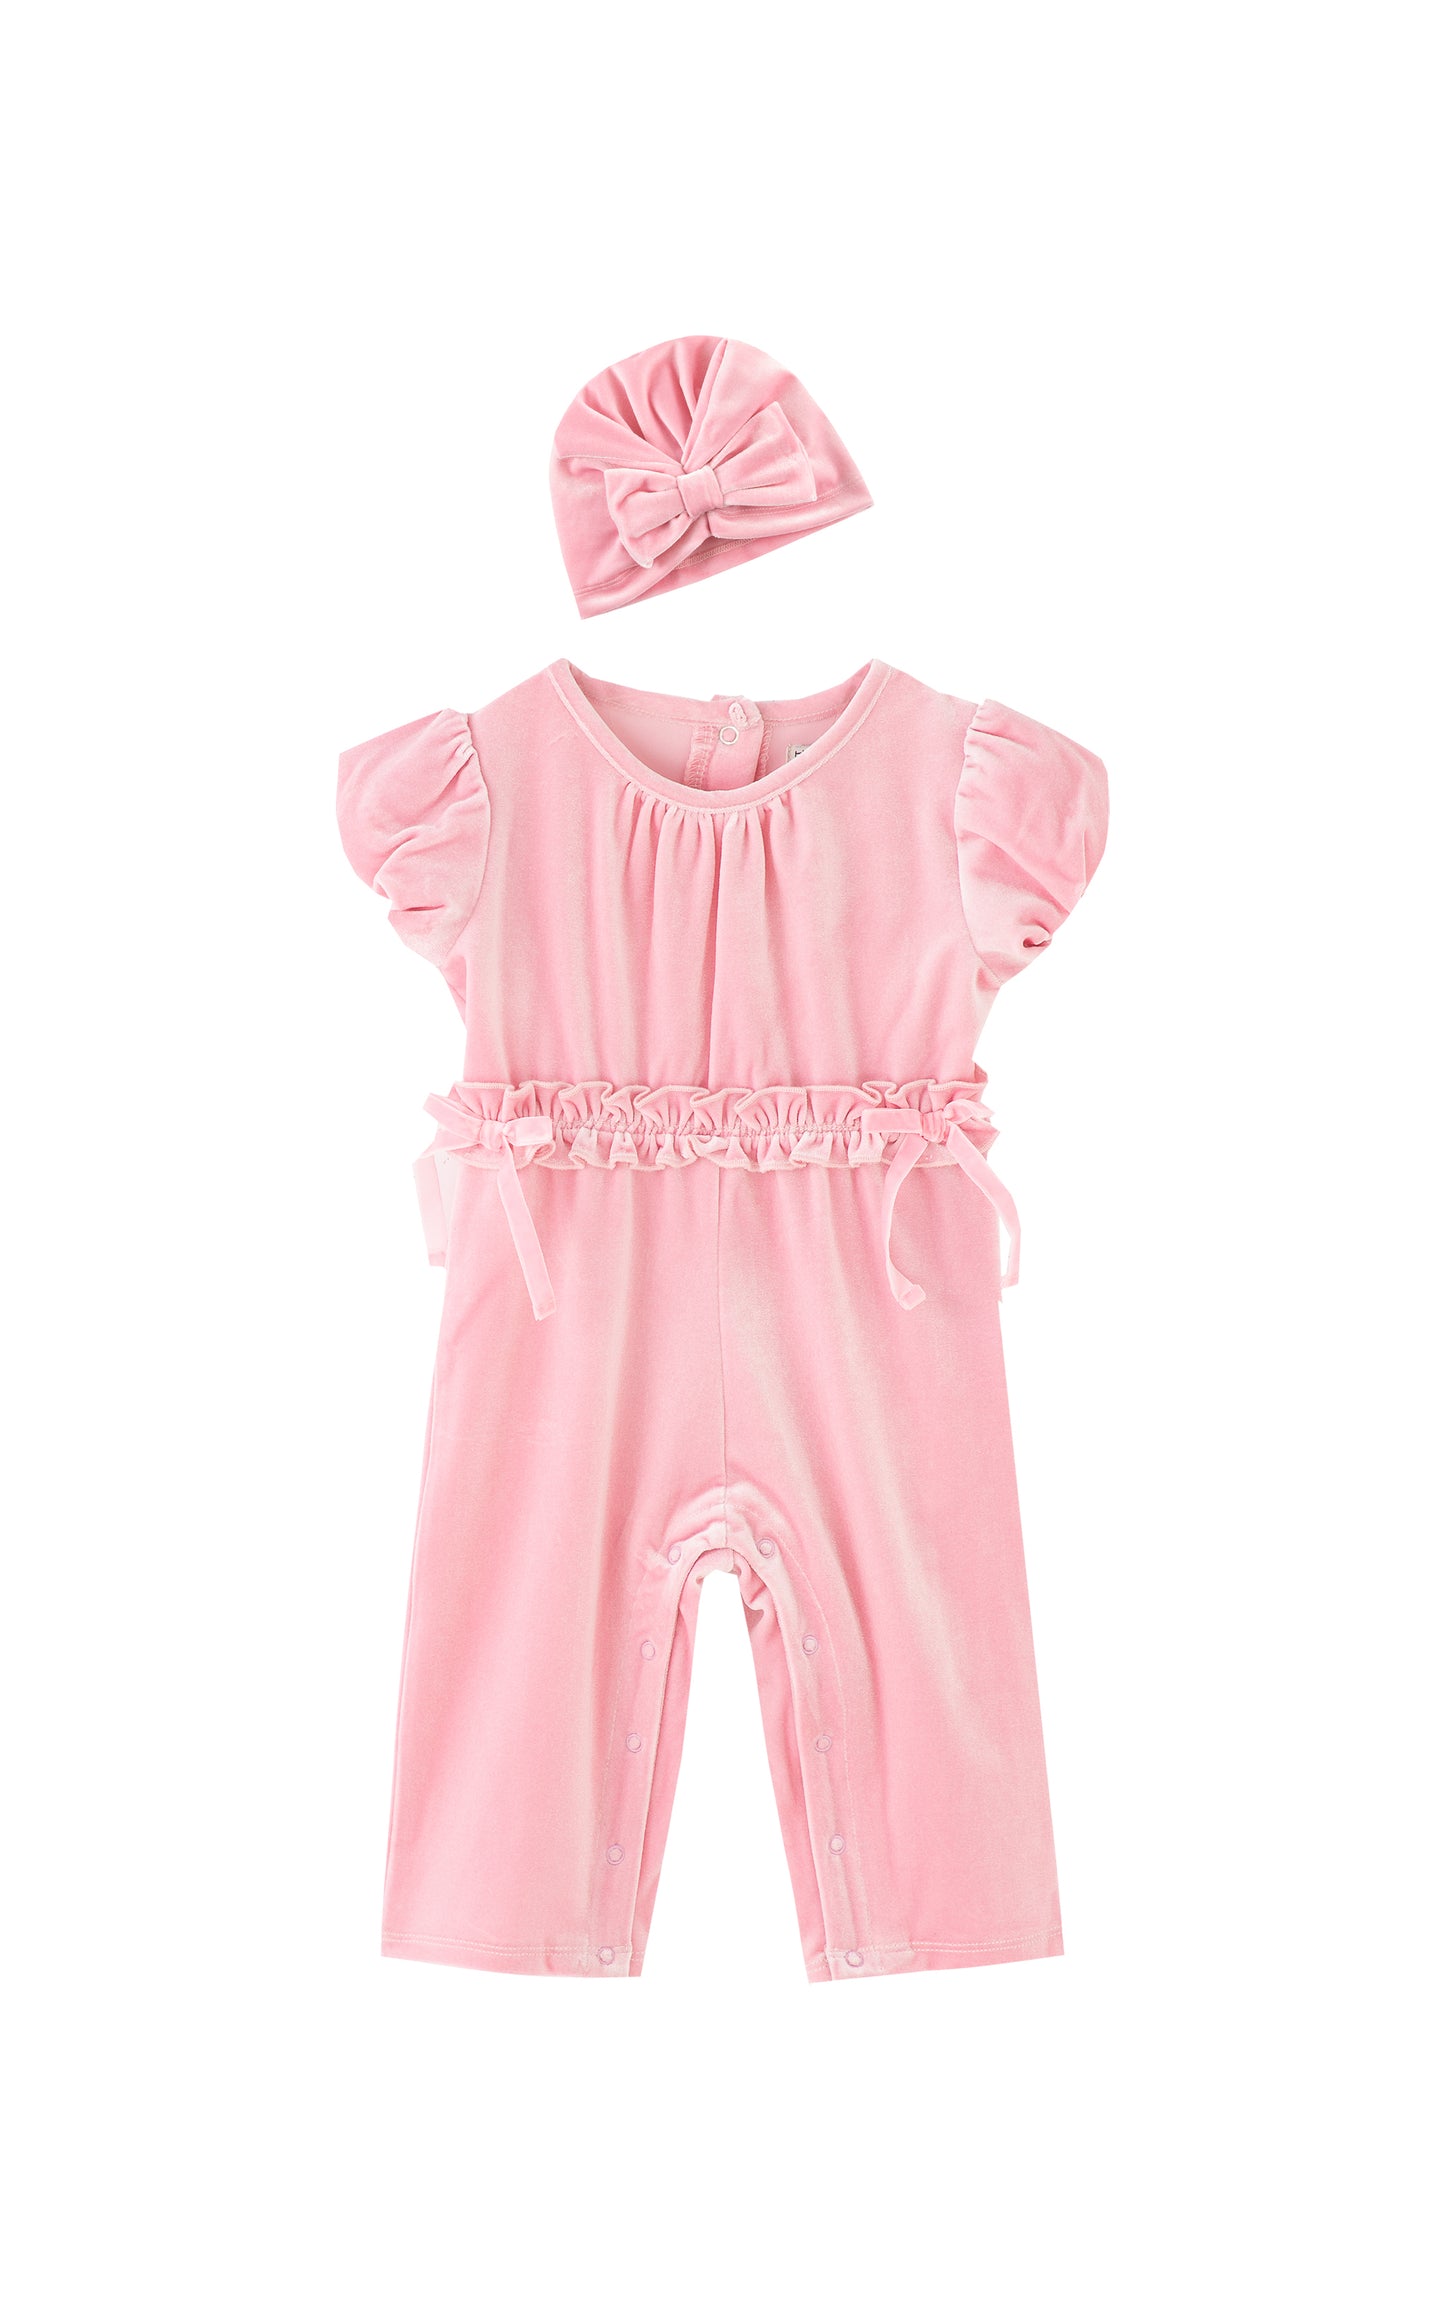 LIGHT PINK VELOUR SHORT-SLEEVE ONESIE JUMPSUIT AND MATCHING HAT WITH A BOW